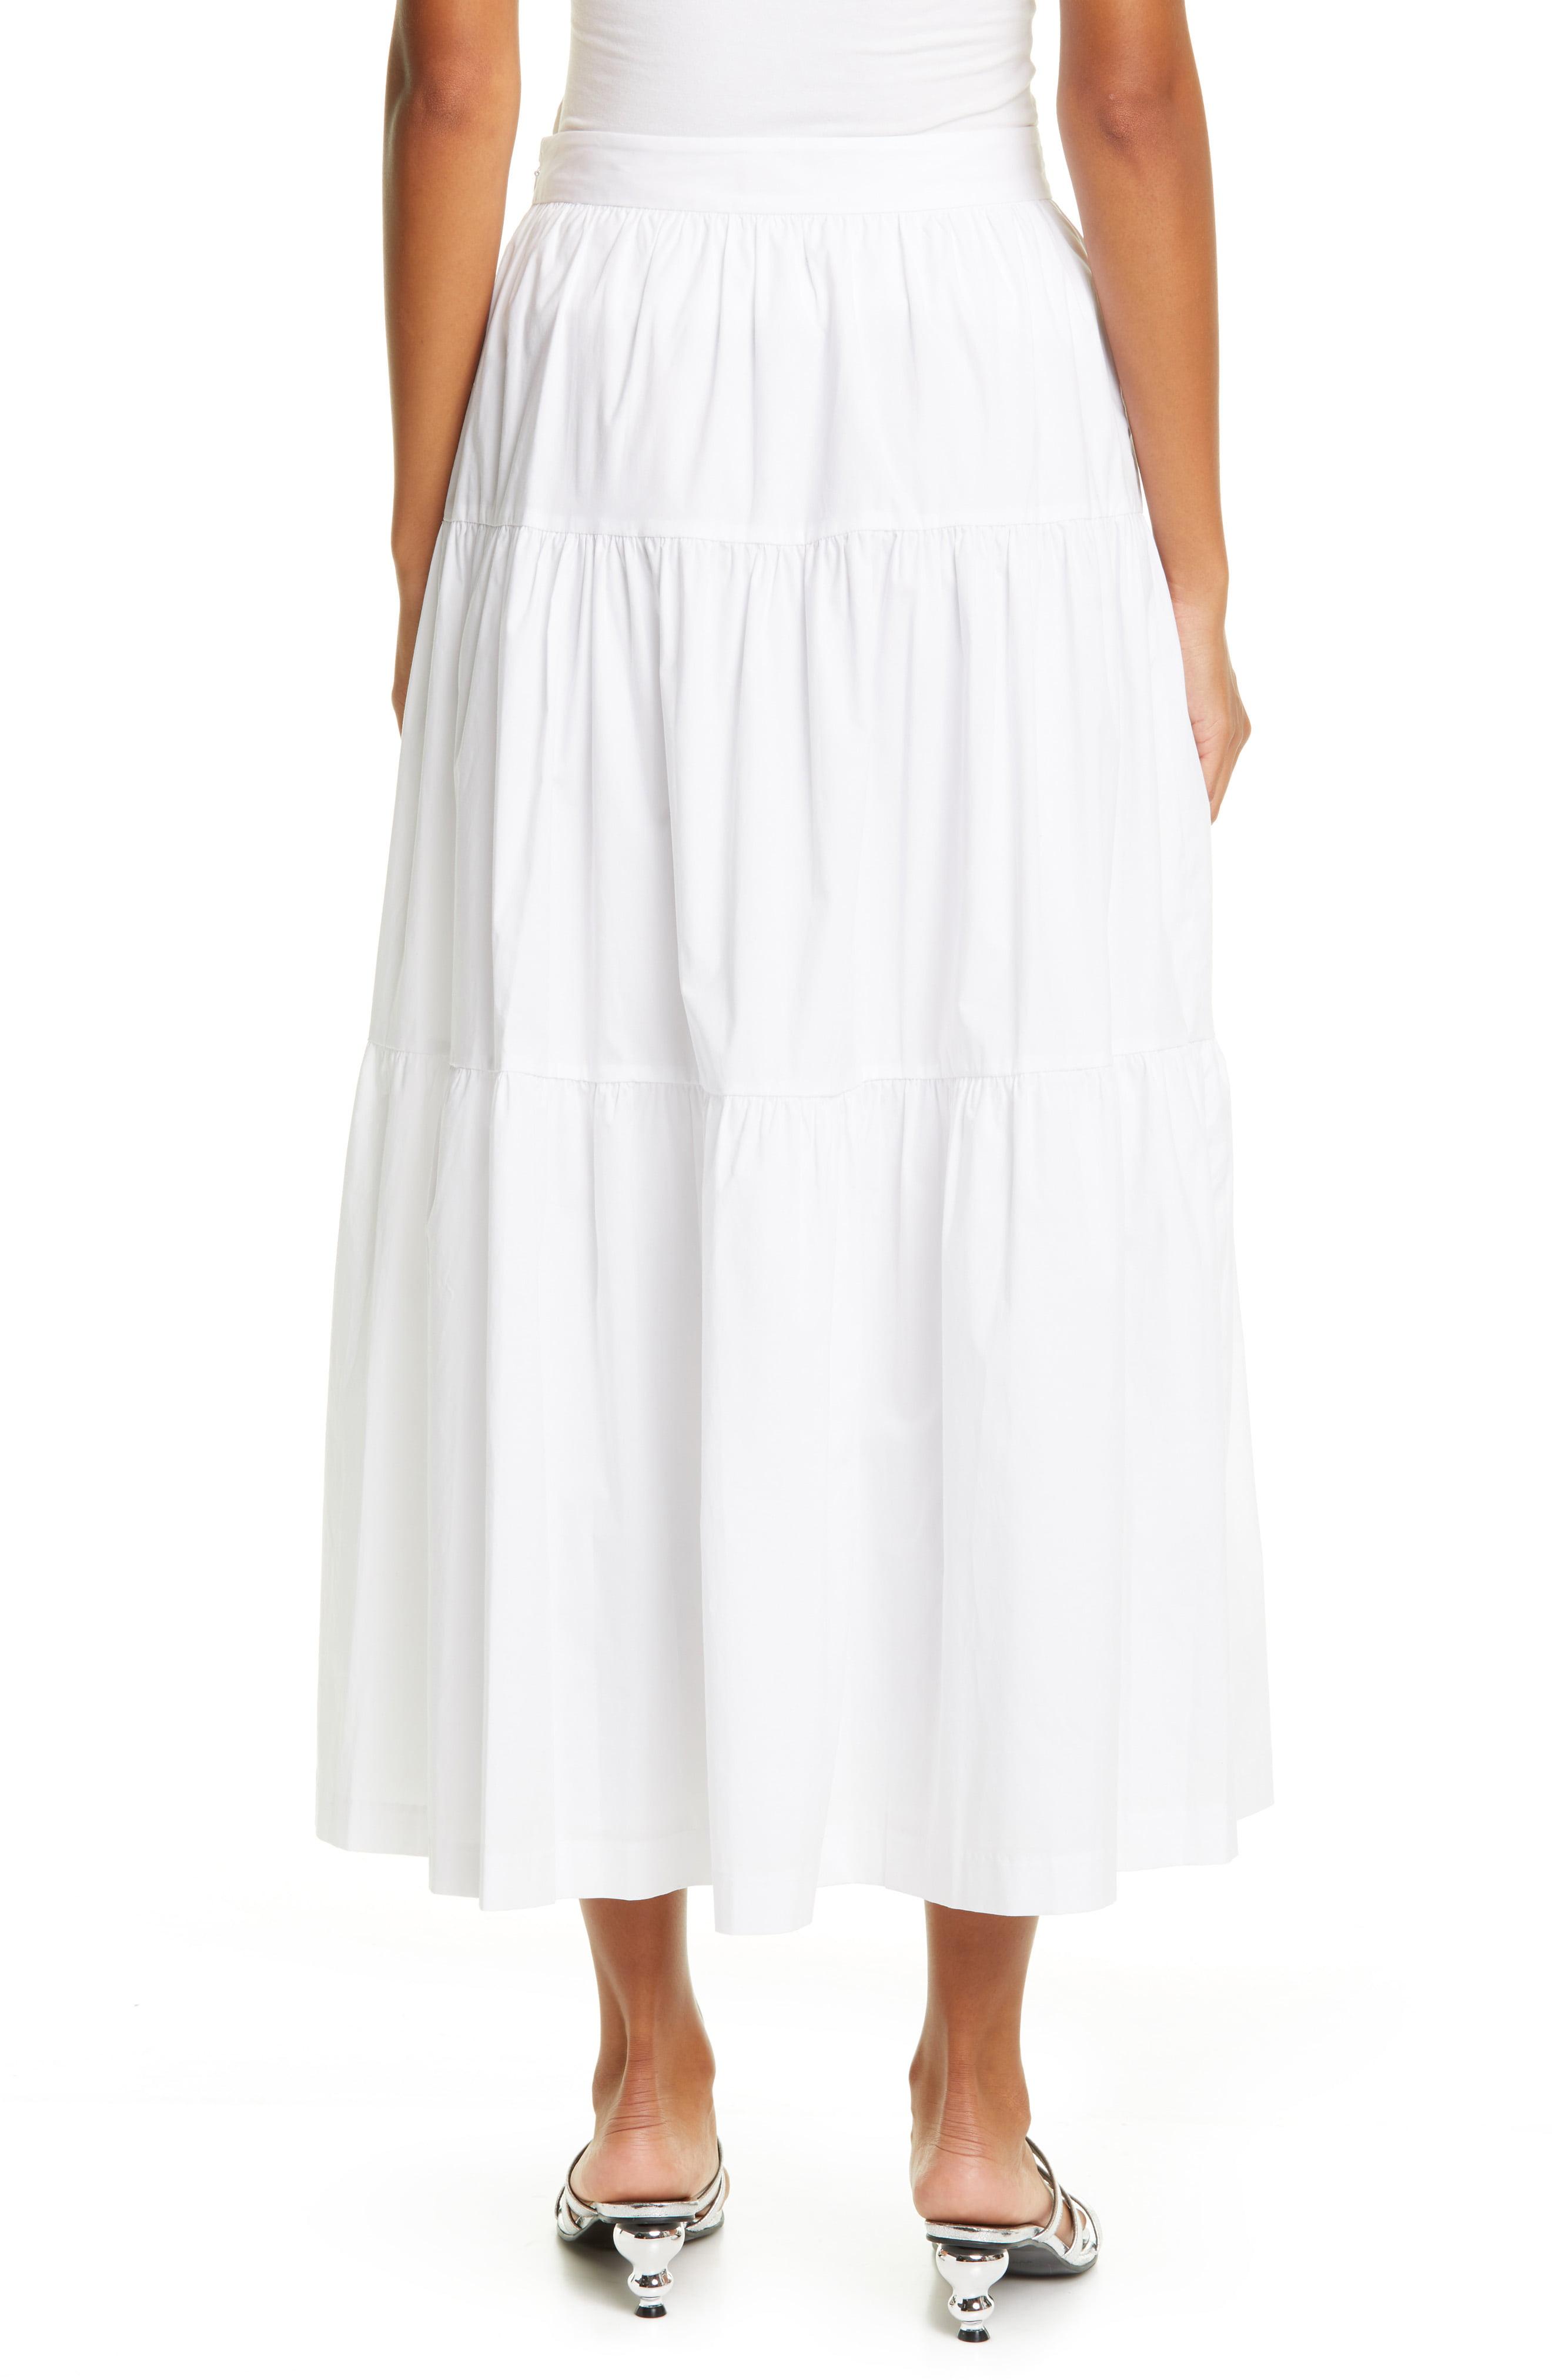 STAUD Tiered Stretch Cotton Maxi Skirt in White - Lyst